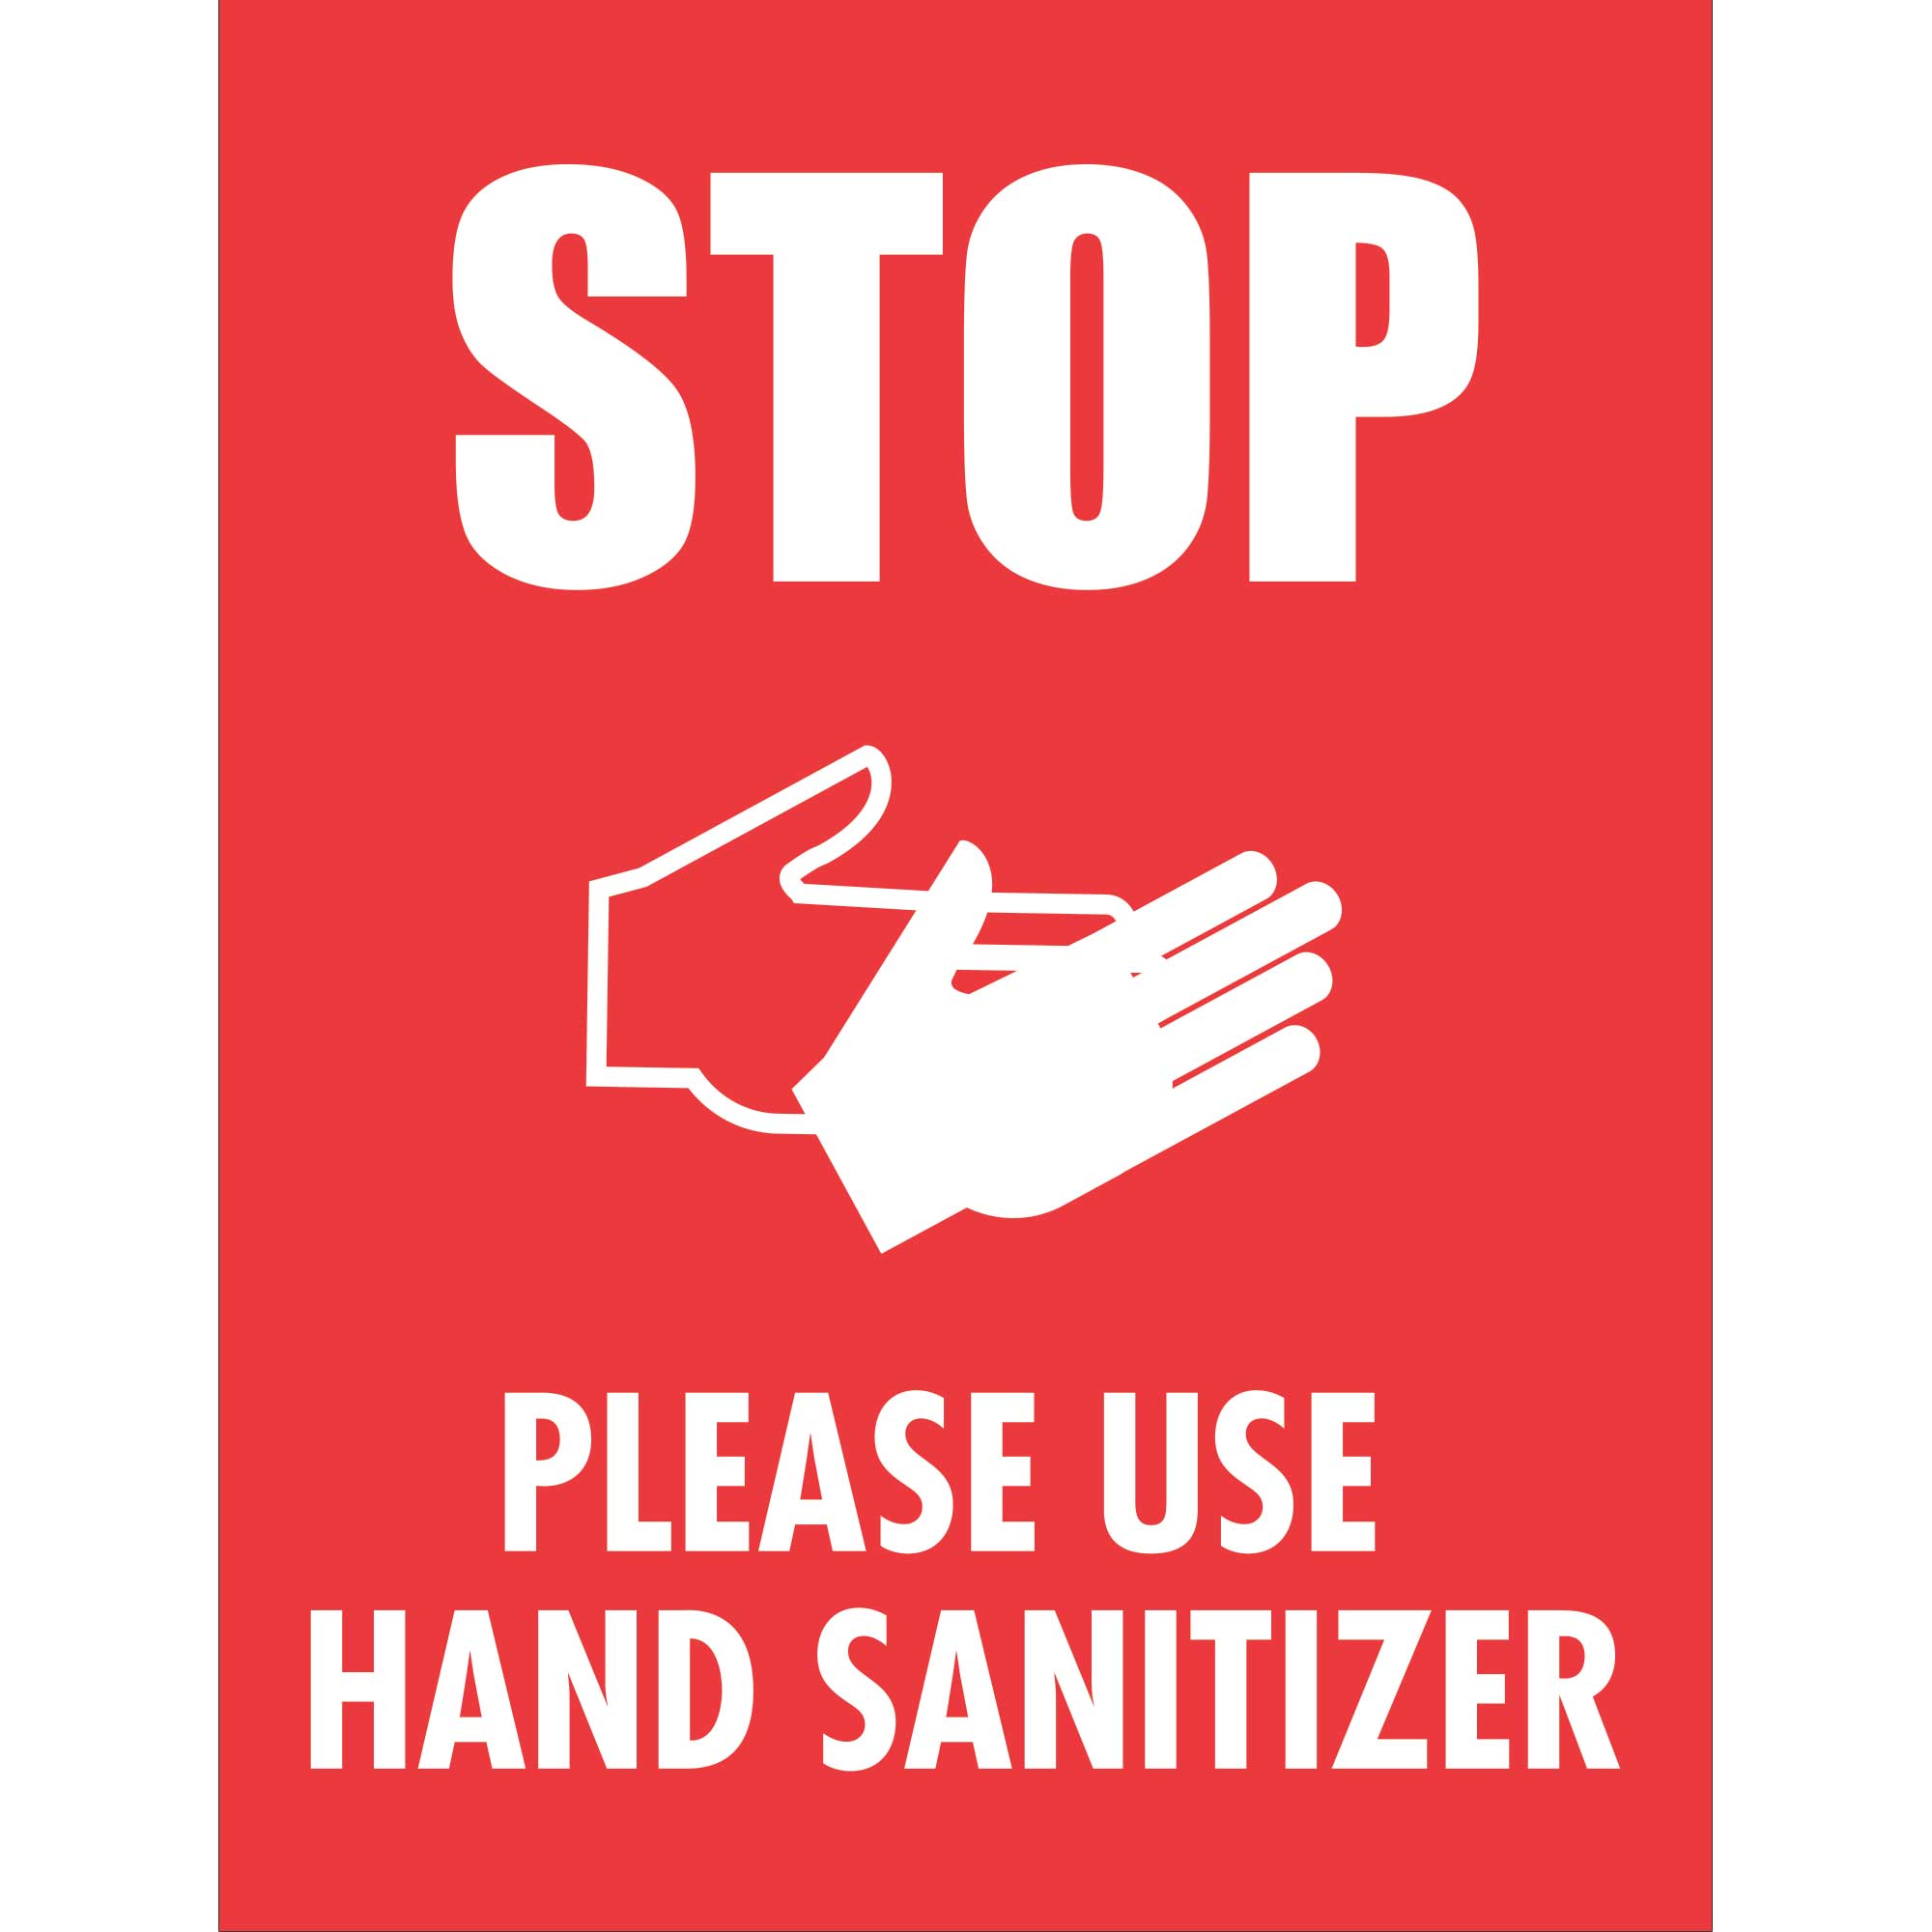 "STOP Please Use Hand Sanitizer" Poster Plum Grove